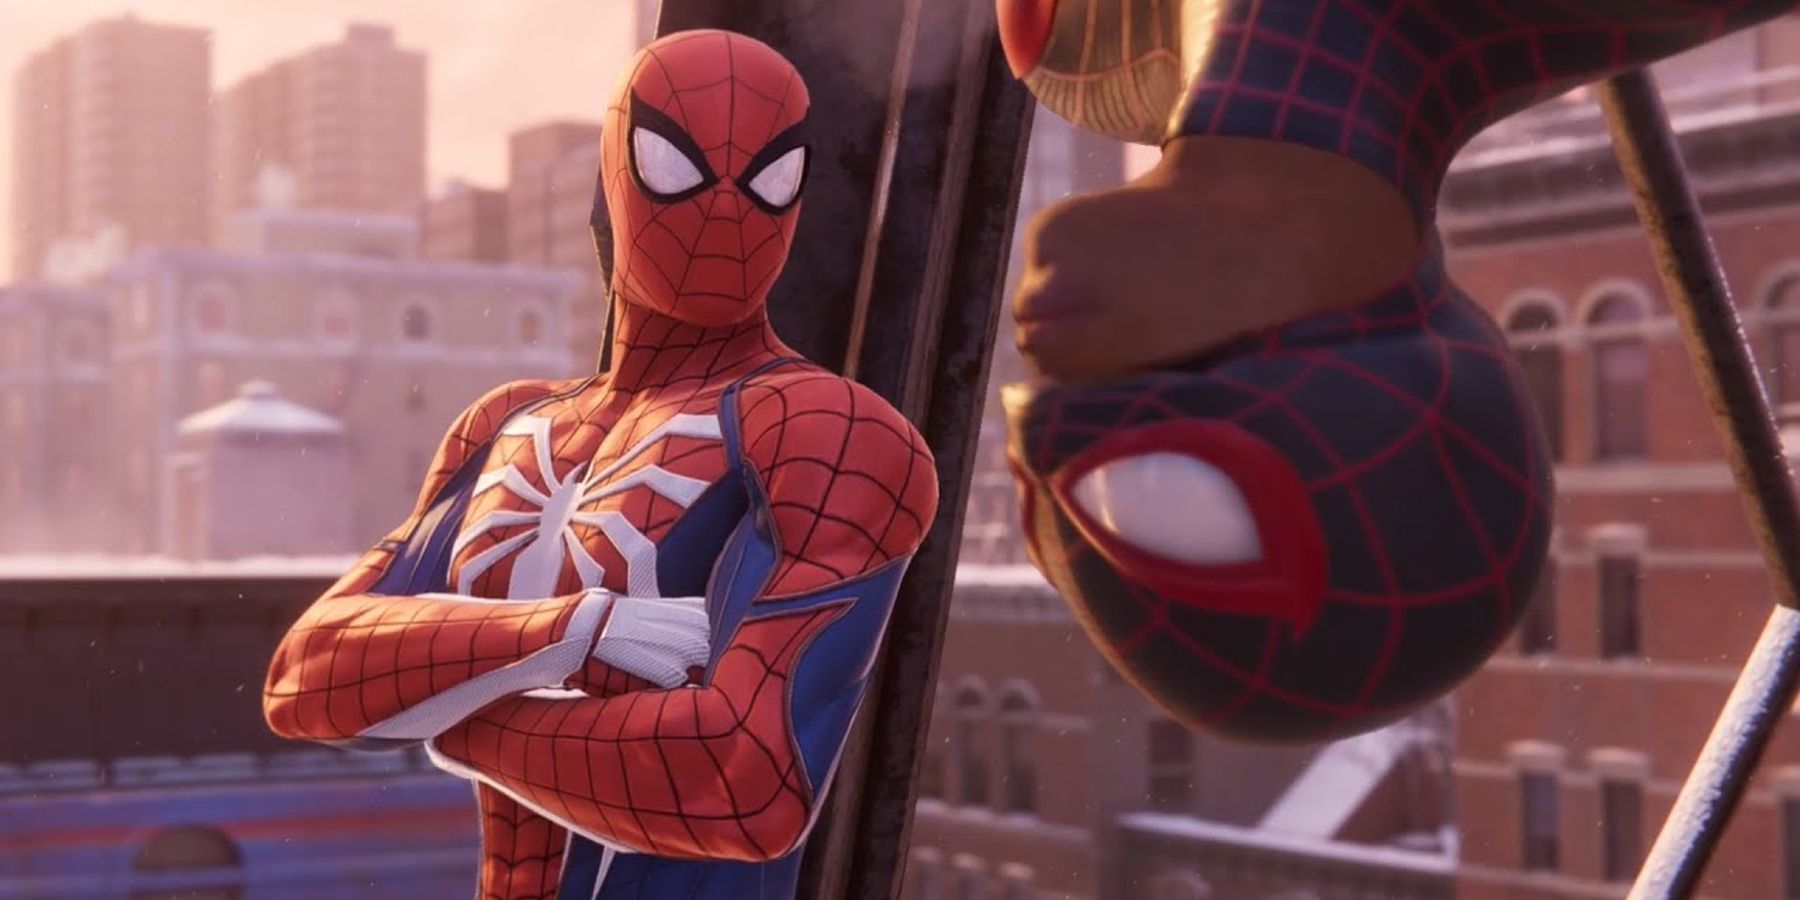 YOU CAN PLAY SPIDER-MAN 2 ON PS4! #shorts #spiderman2